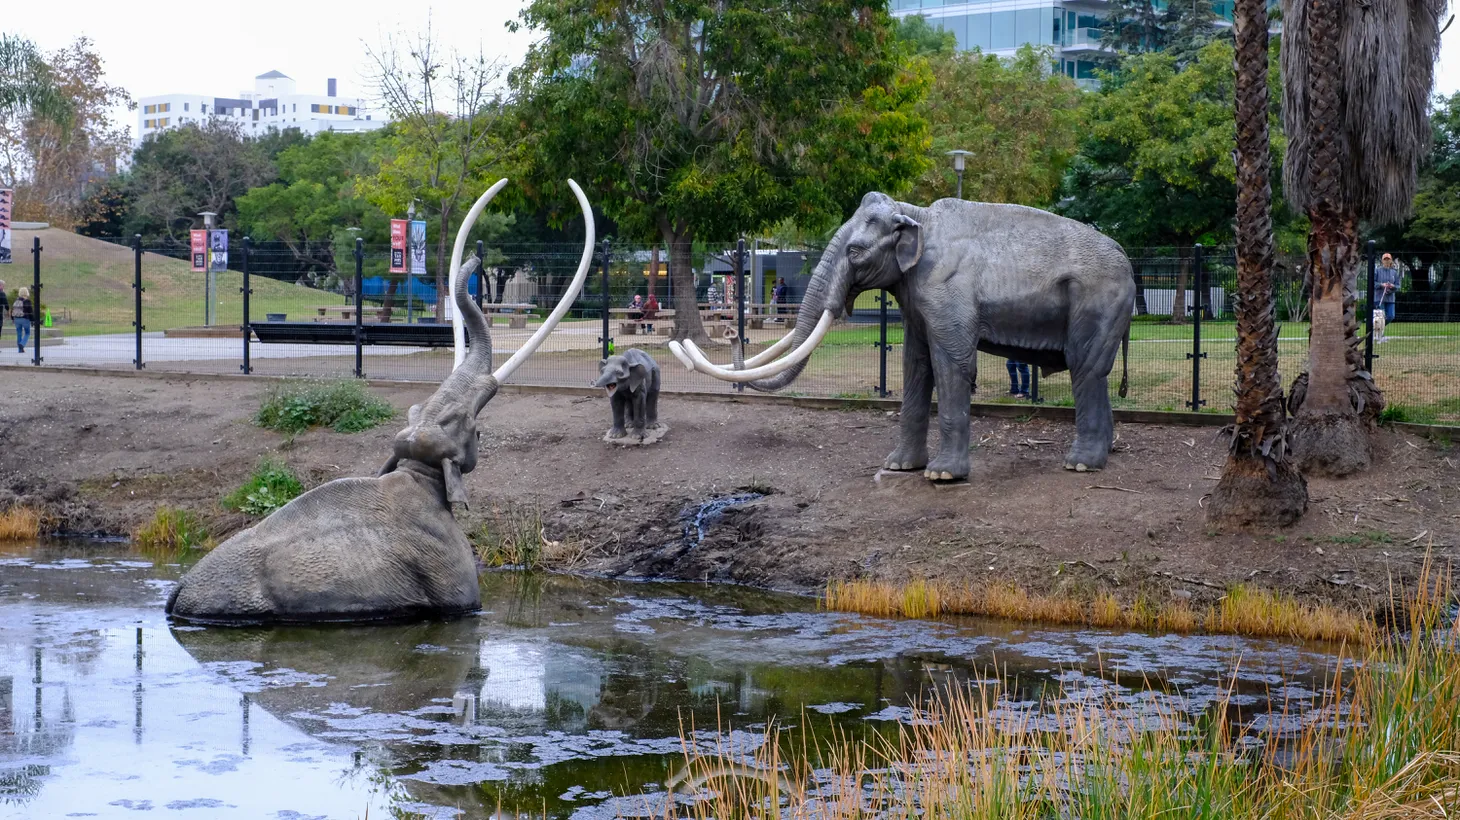 Scientists used carbon dating to determine the age of hundreds of fossils from the La Brea Tar Pits and Lake Elsinore, and found that many animals went extinct around the same time humans arrived.